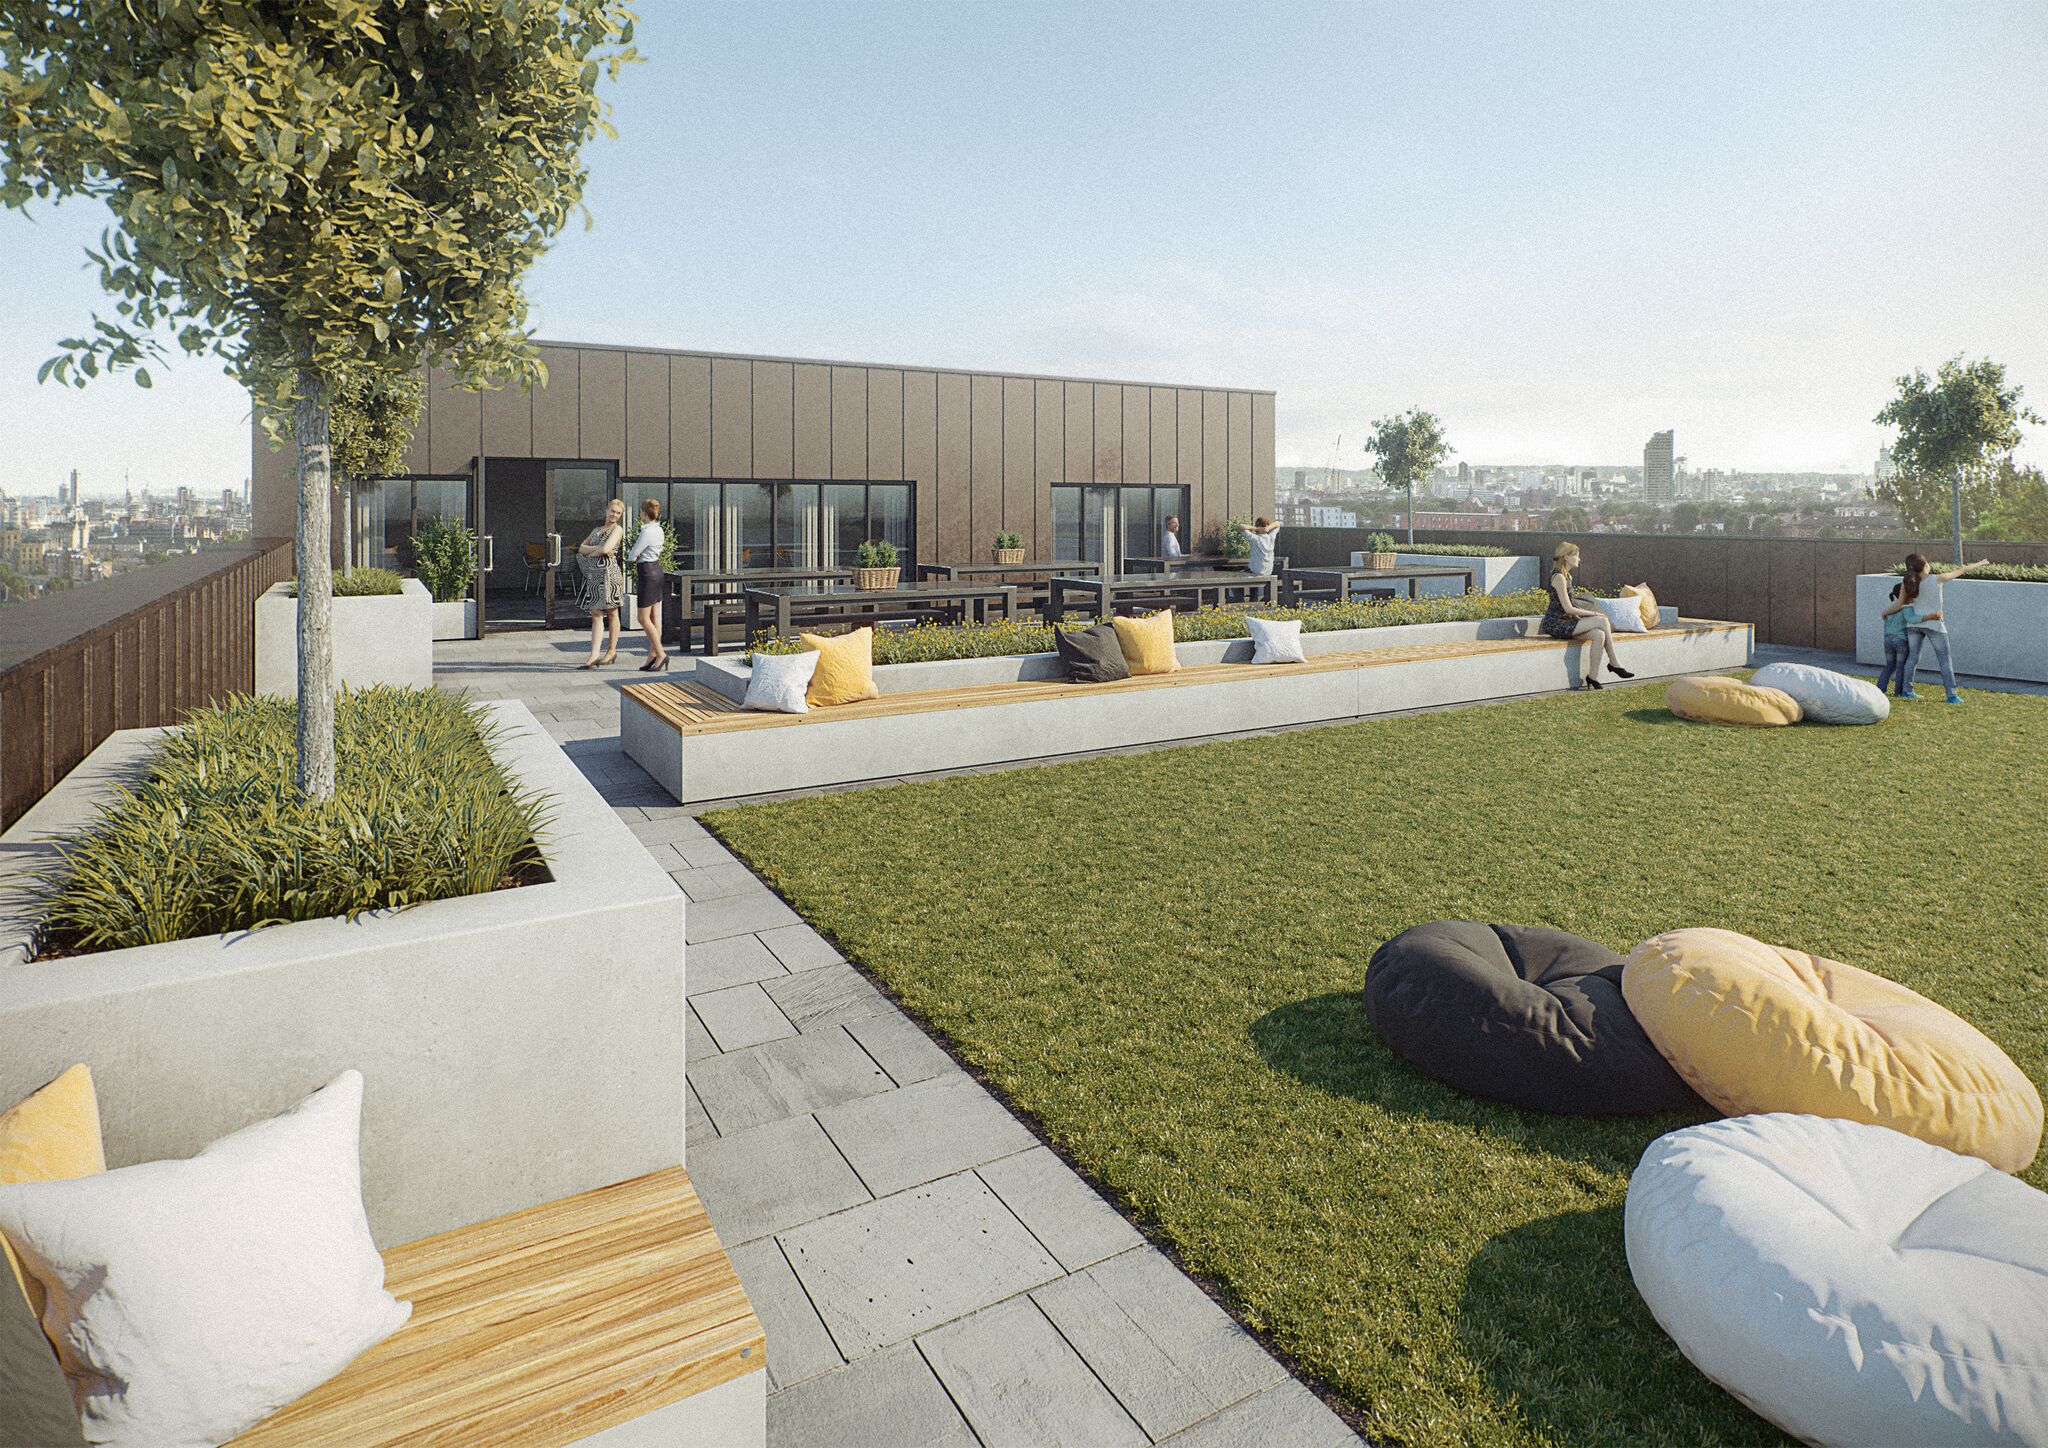 Landscaped rooftop gardens at the Waterhouse Manchester